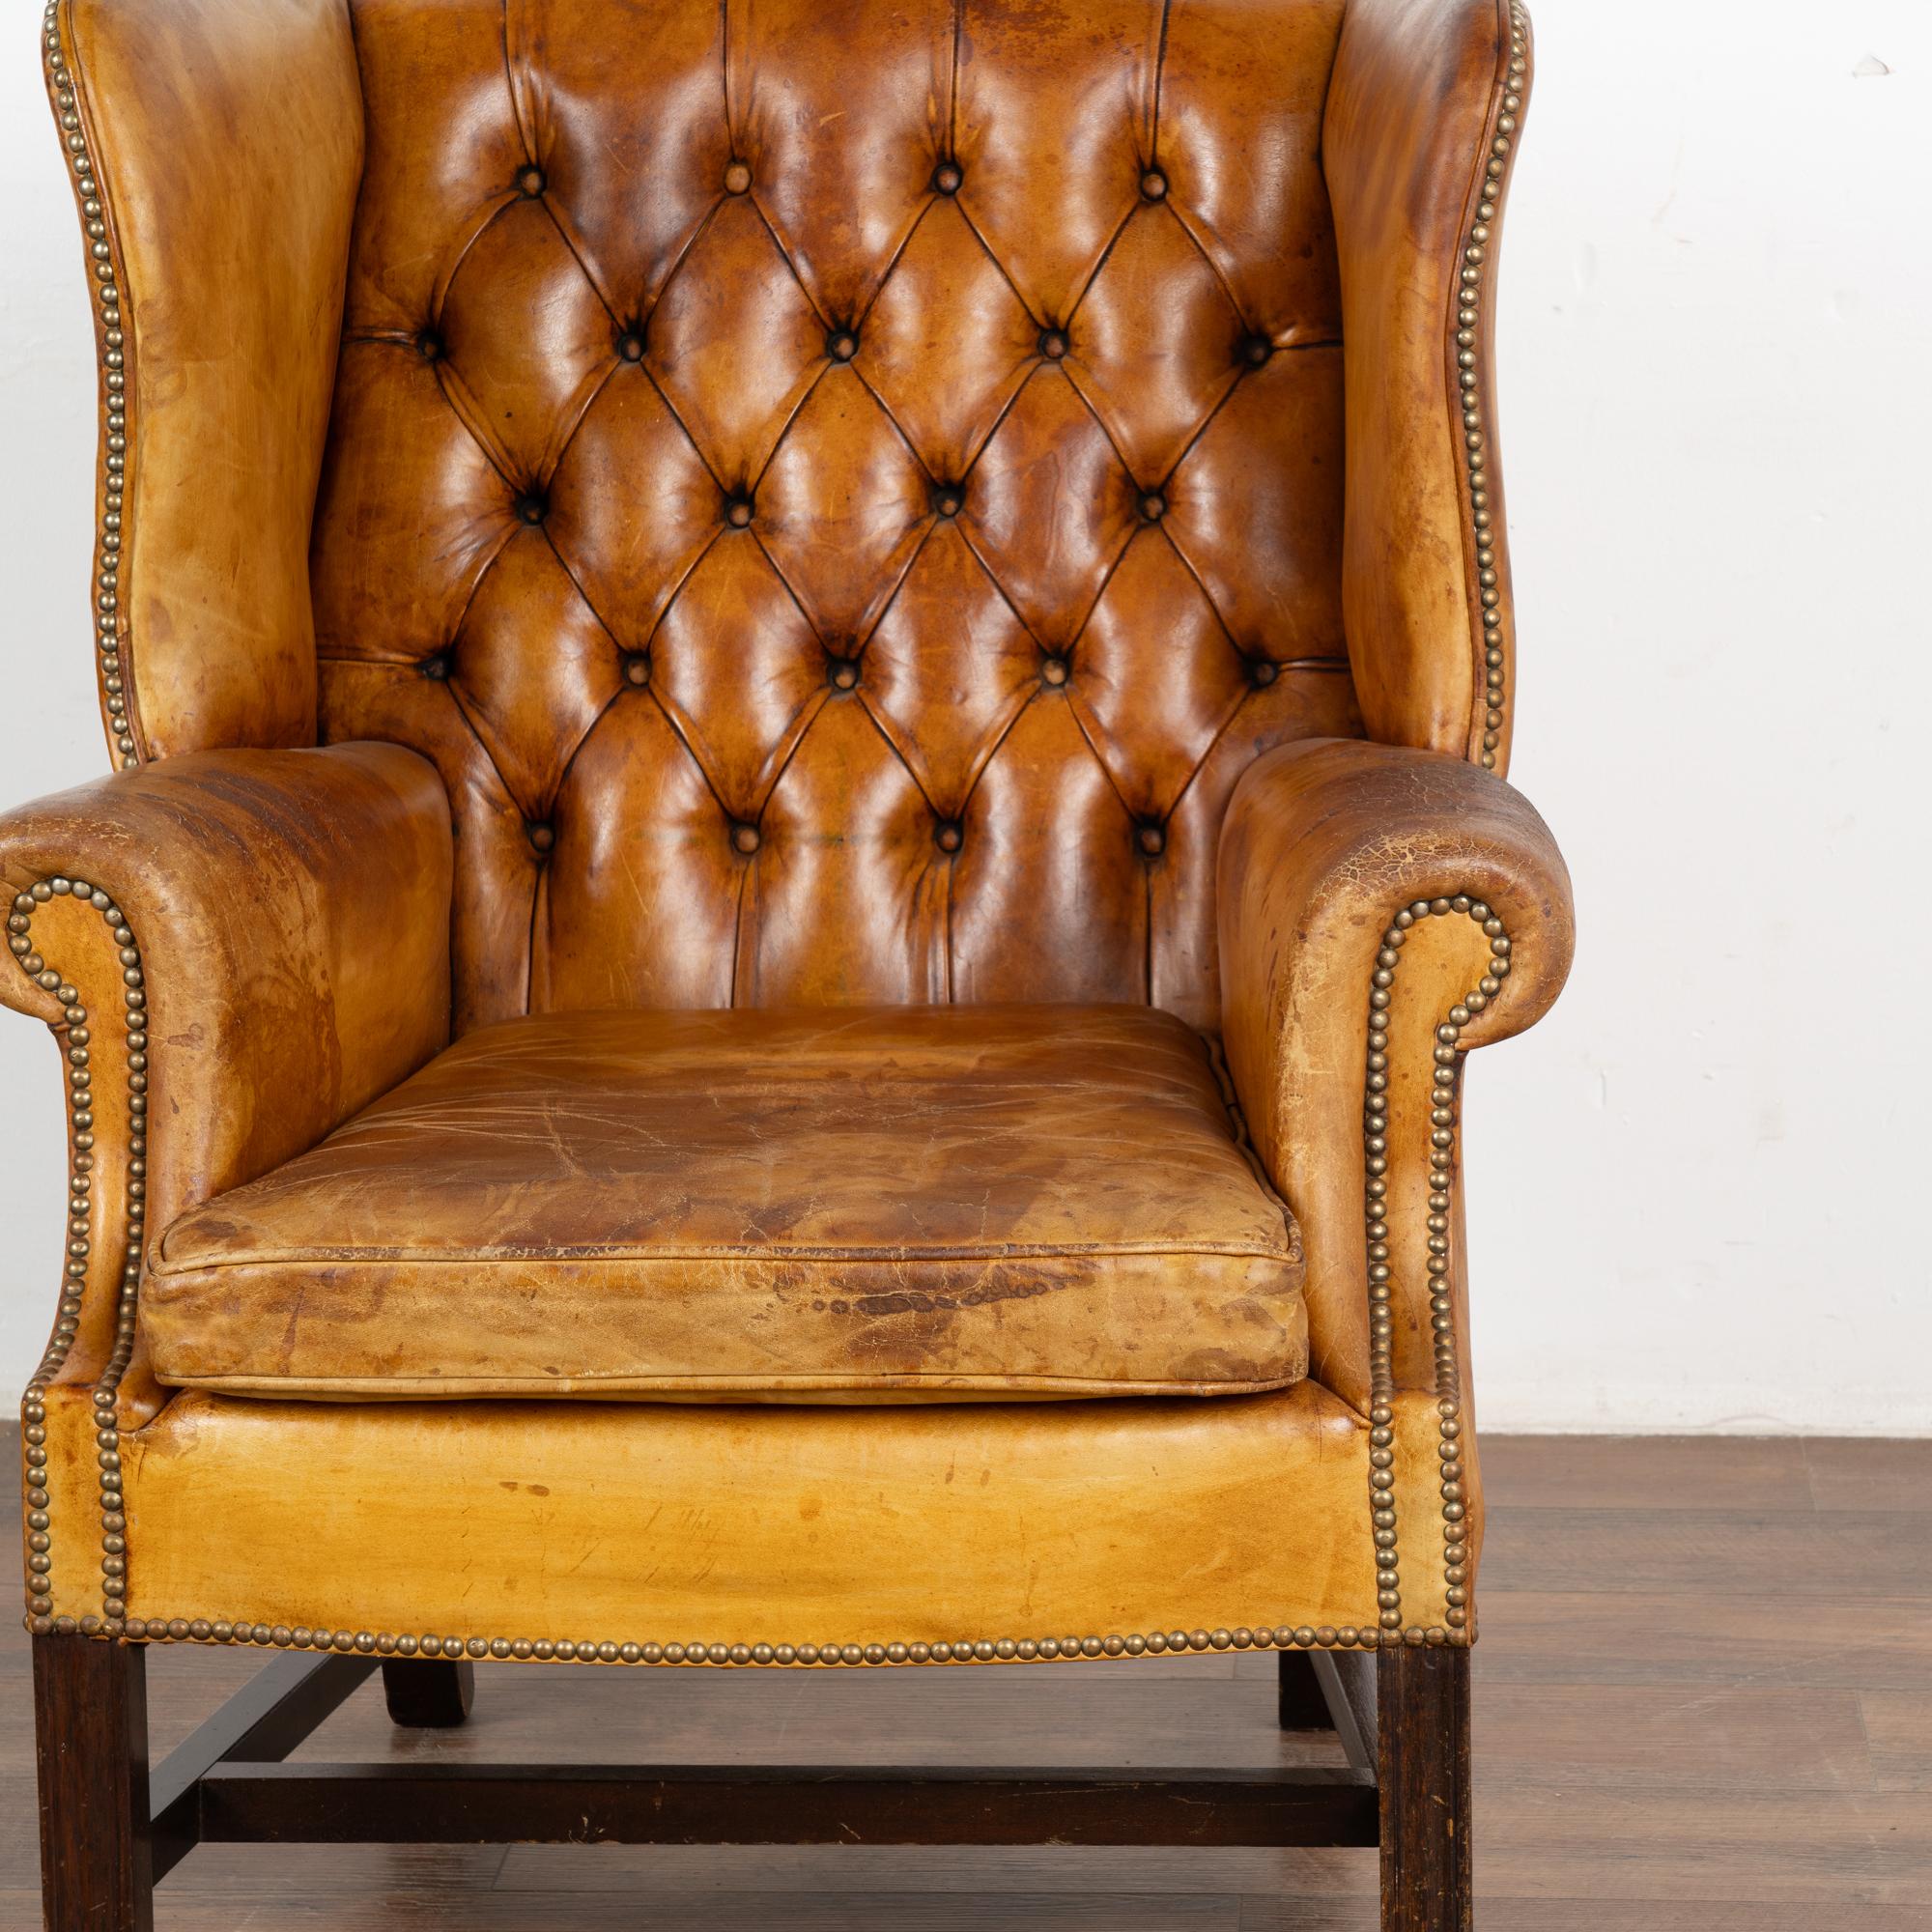 20th Century Vintage Brown Leather Wingback Chesterfield Arm Chair, England circa 1940